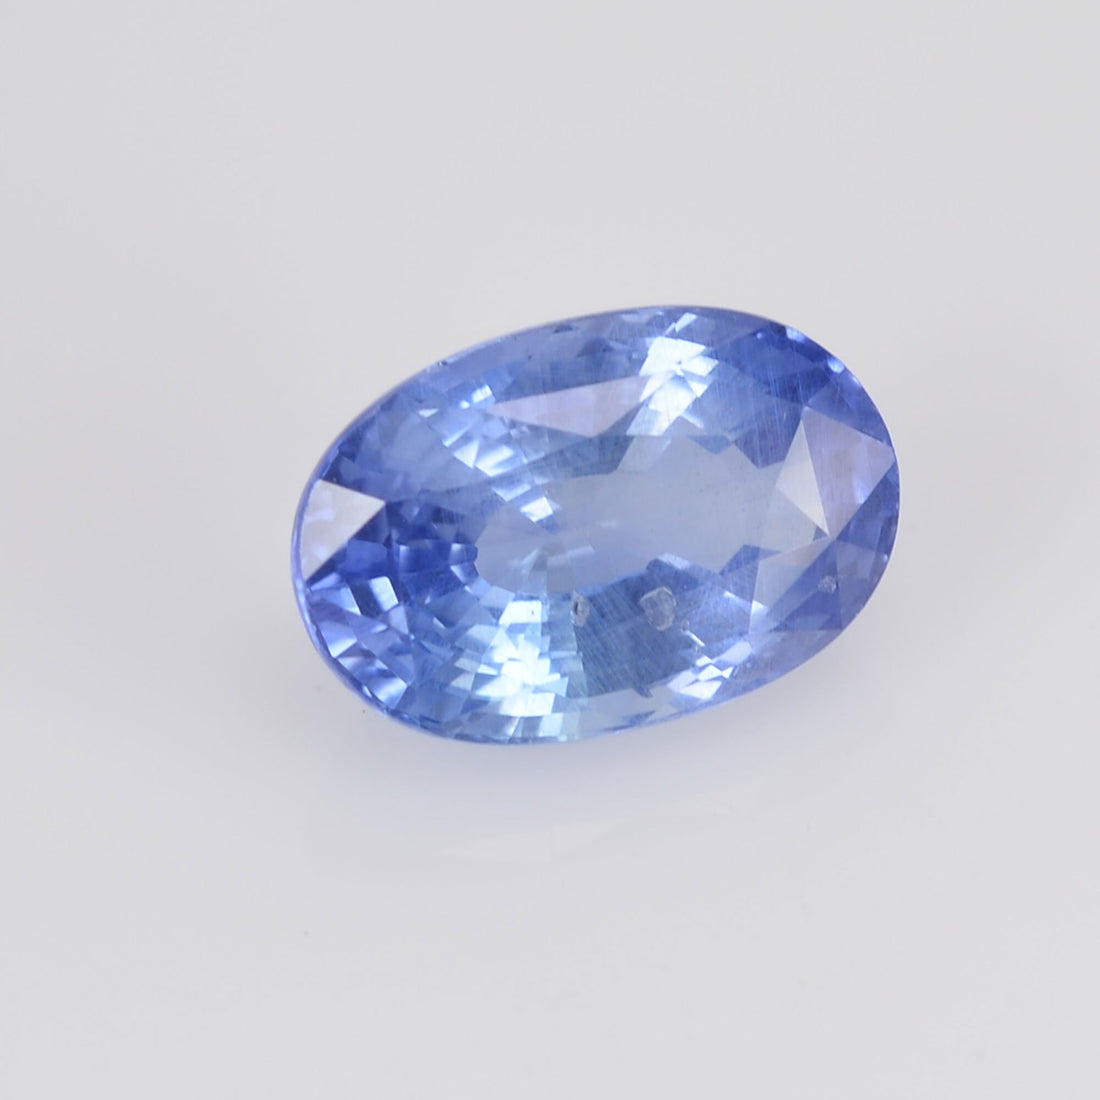 2.06 cts Natural Blue Sapphire Loose Gemstone Oval Cut Certified